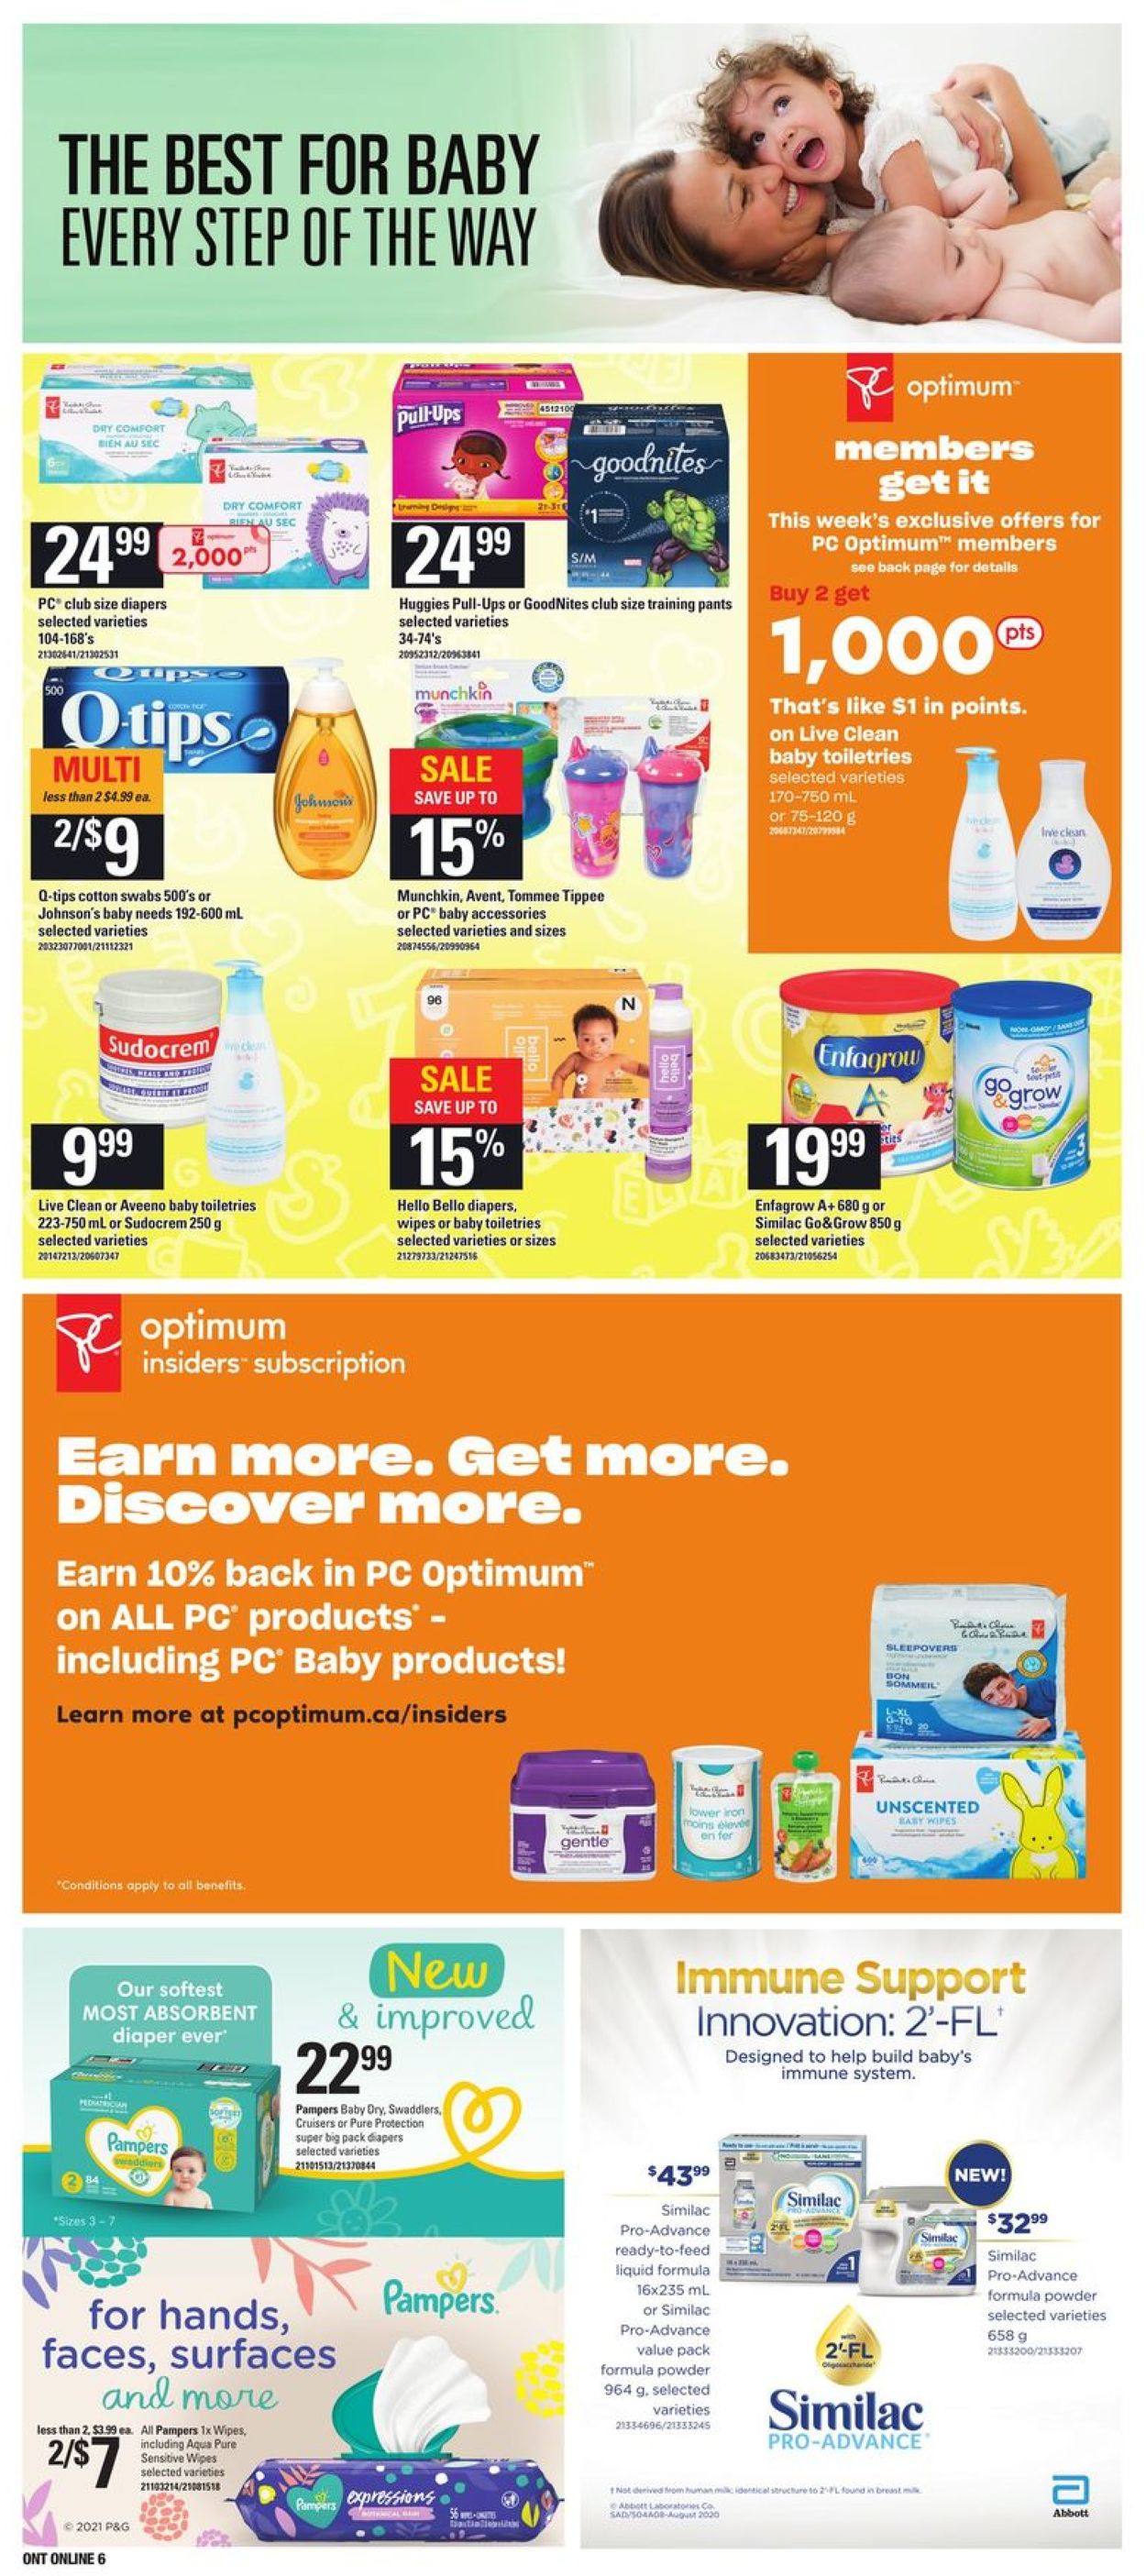 Zehrs Flyer from 05/06/2021